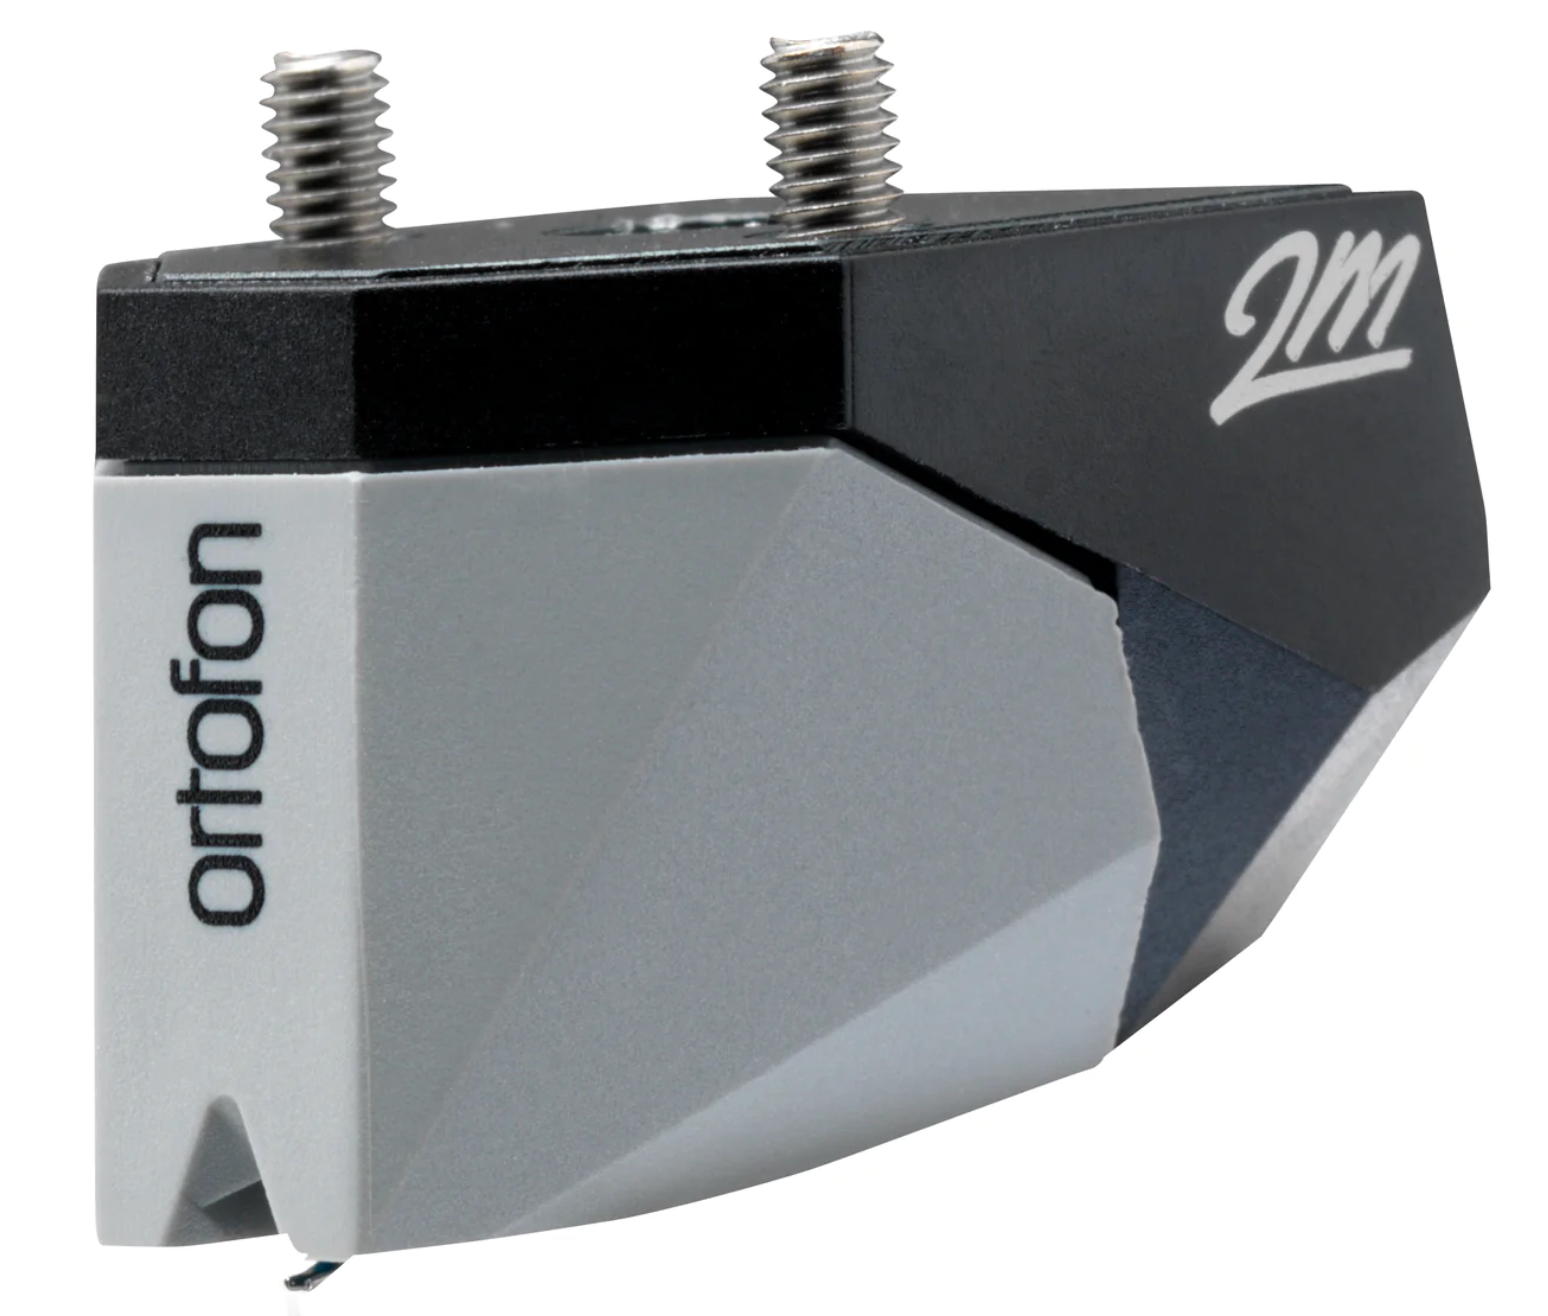 Ortofon 2M 78 Pre-Mounted on SH-4 Headshell - image showing connection points